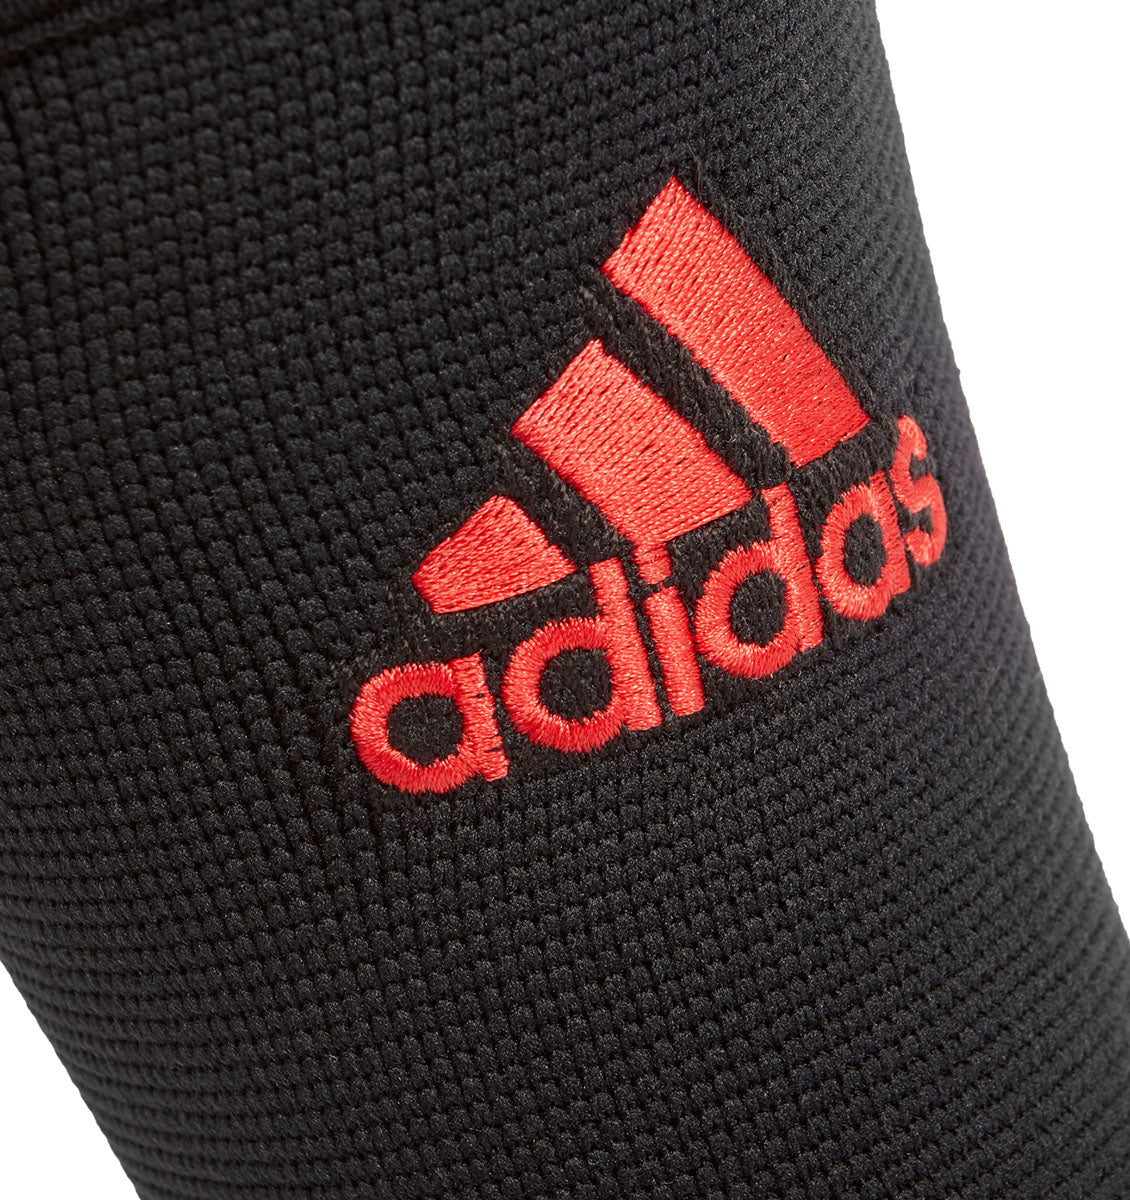 adidas Essential Ankle Support/Sleeve - Black - 3